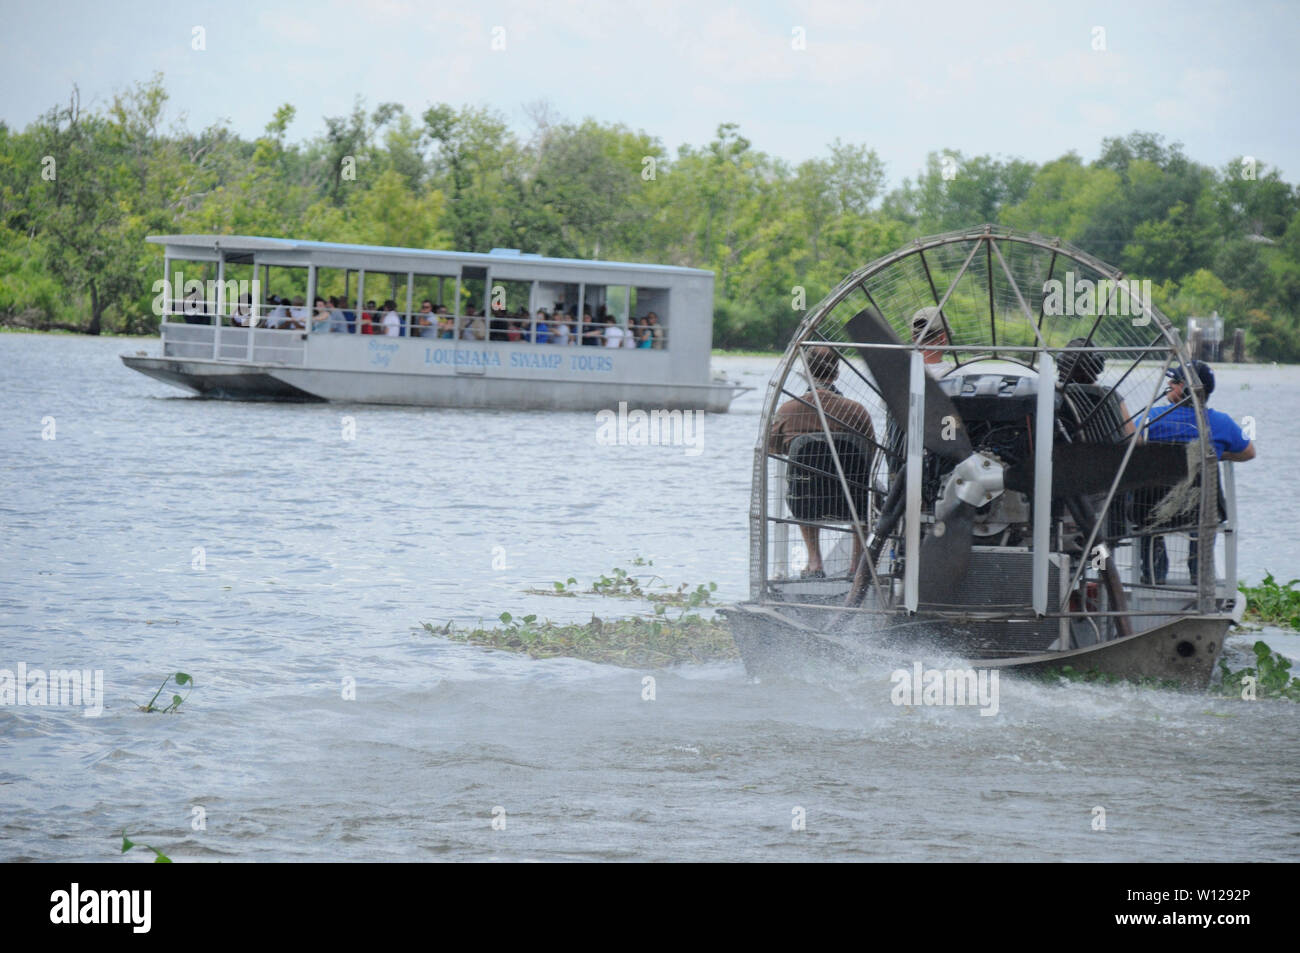 Airboat on swamp tour near New Orleans, Louisiana Stock Photo